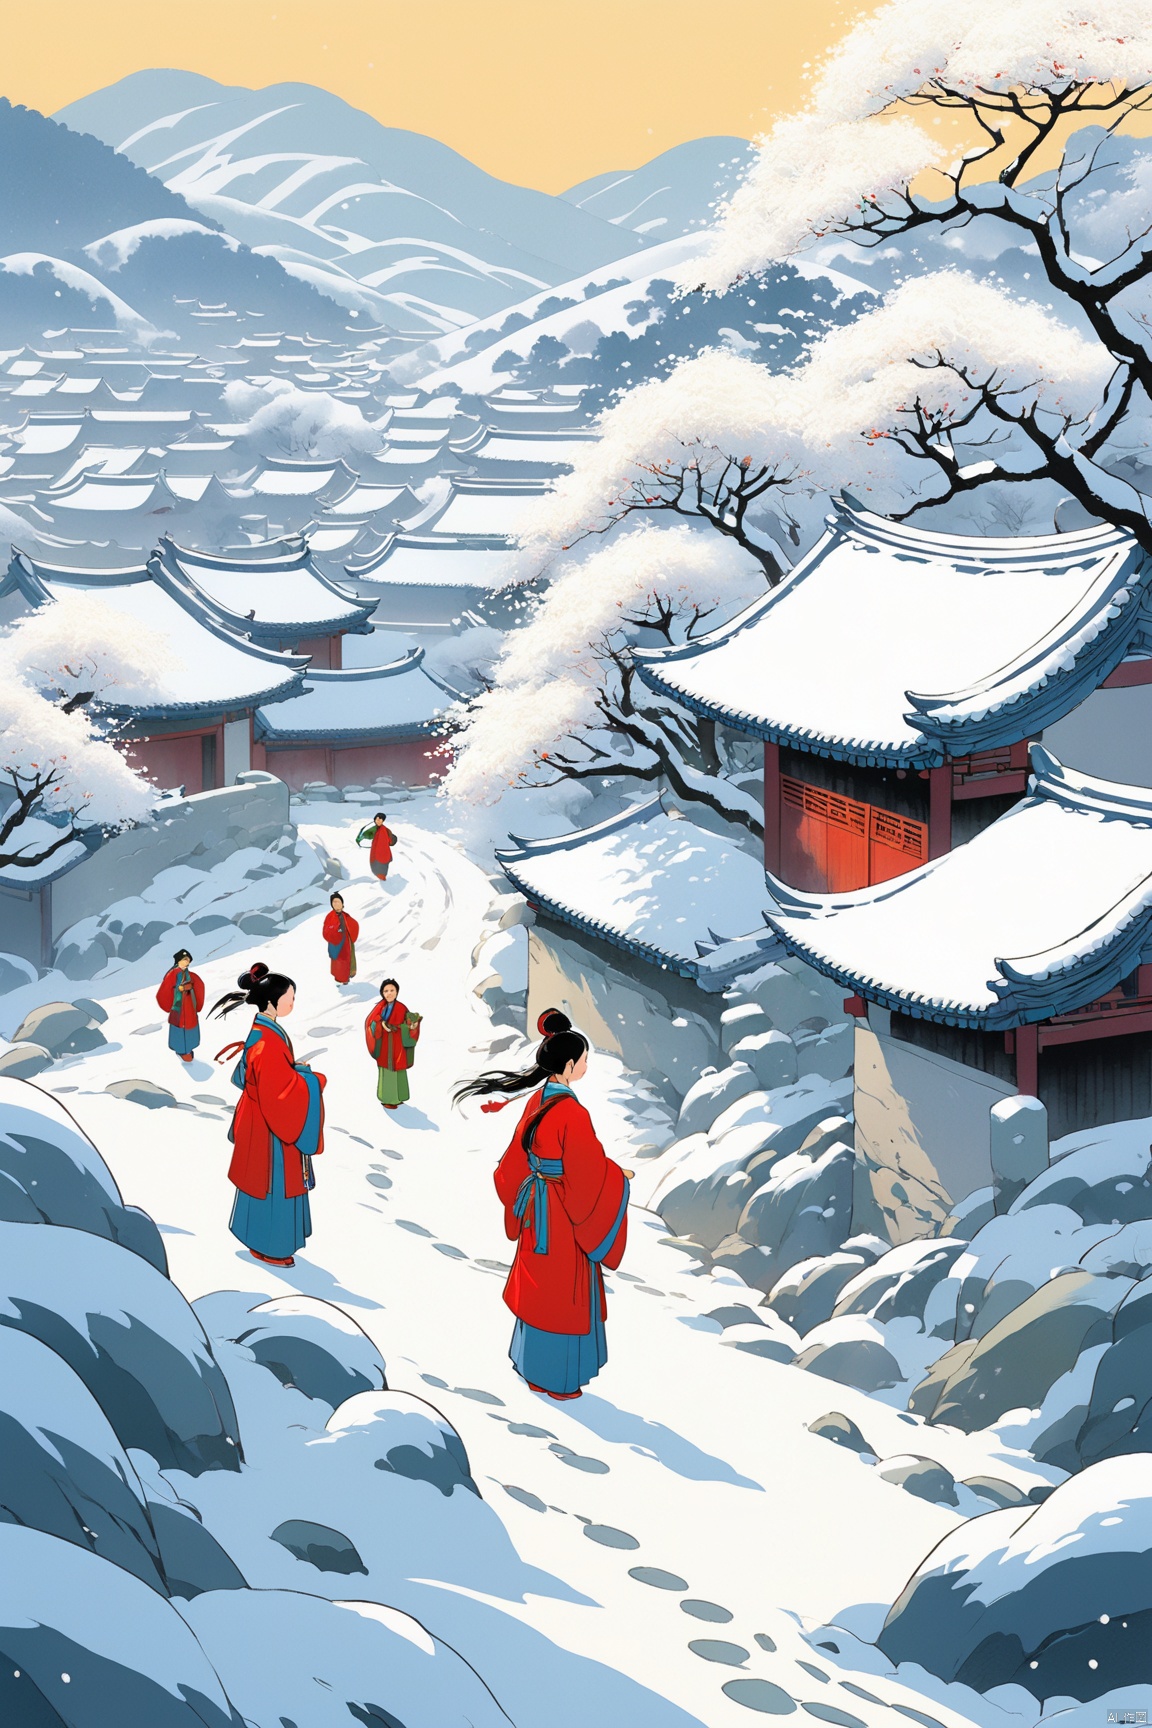  Thick Tu Guomang, Feng Zikai, textbook illustrations, children's illustrations, Northeast Snow Village, with heavy snowfall,plum blossom,elegant and simple, novel illustration style, depicting rural life, warm scenes, children's book illustrations, official art, digital painting, fine character portrayal, clear facial features, complete fingers, perfect composition, concept art